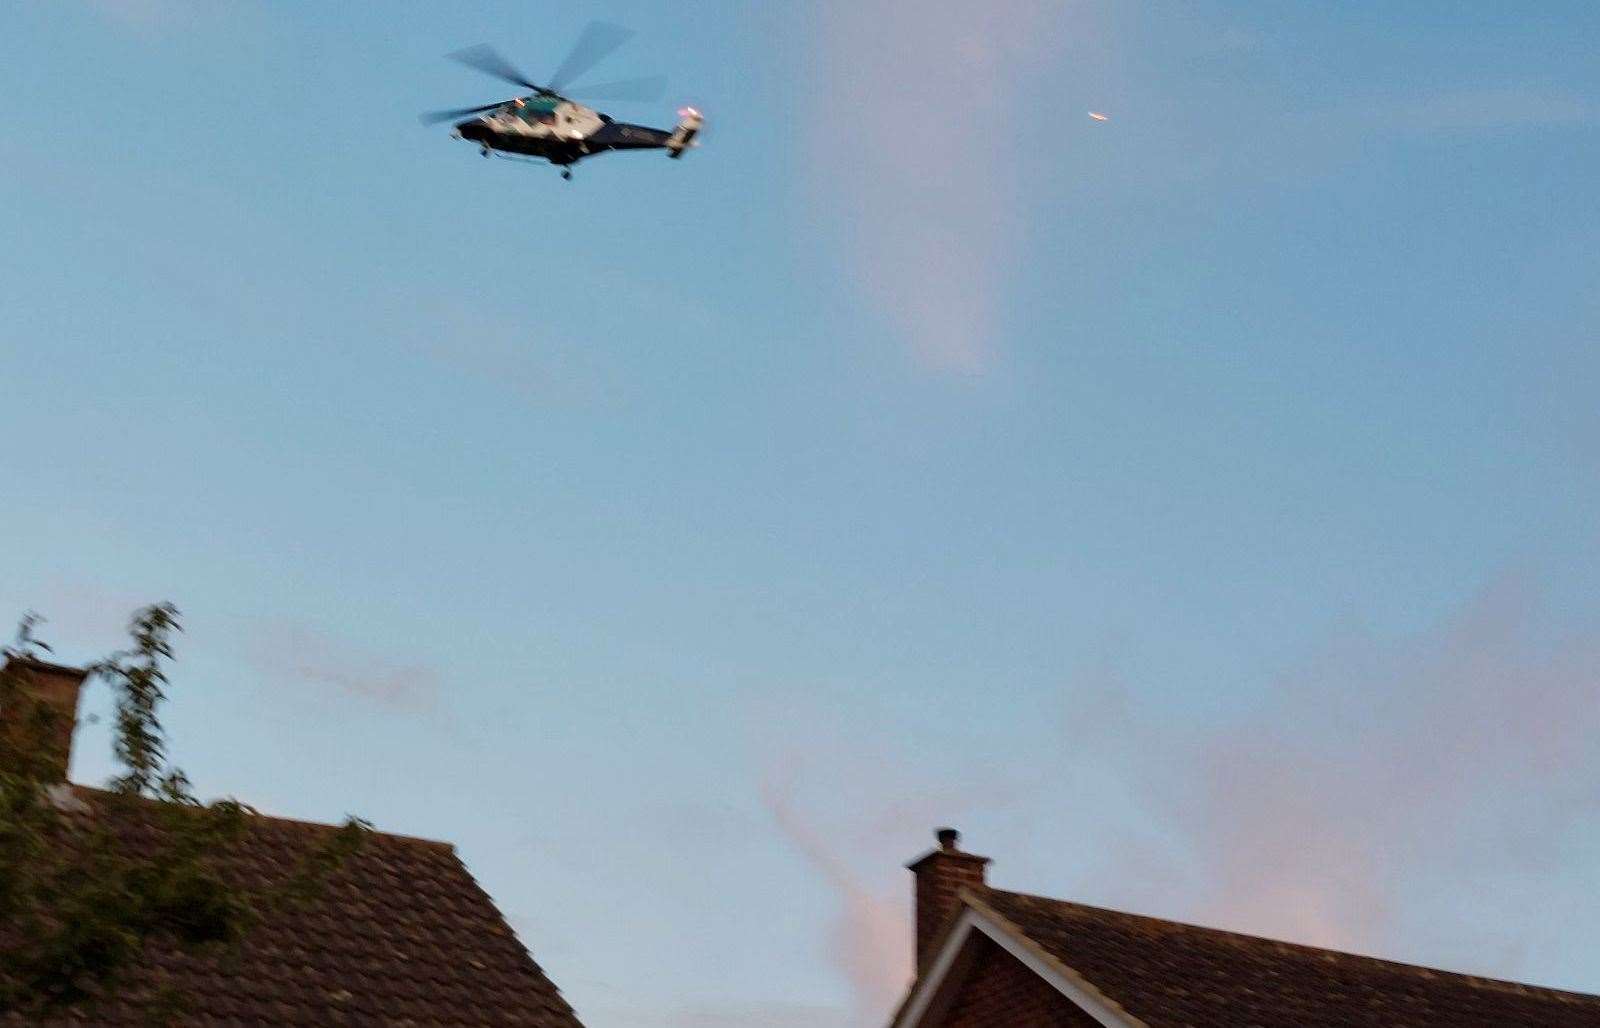 The air ambulance was seen taking off from behind houses